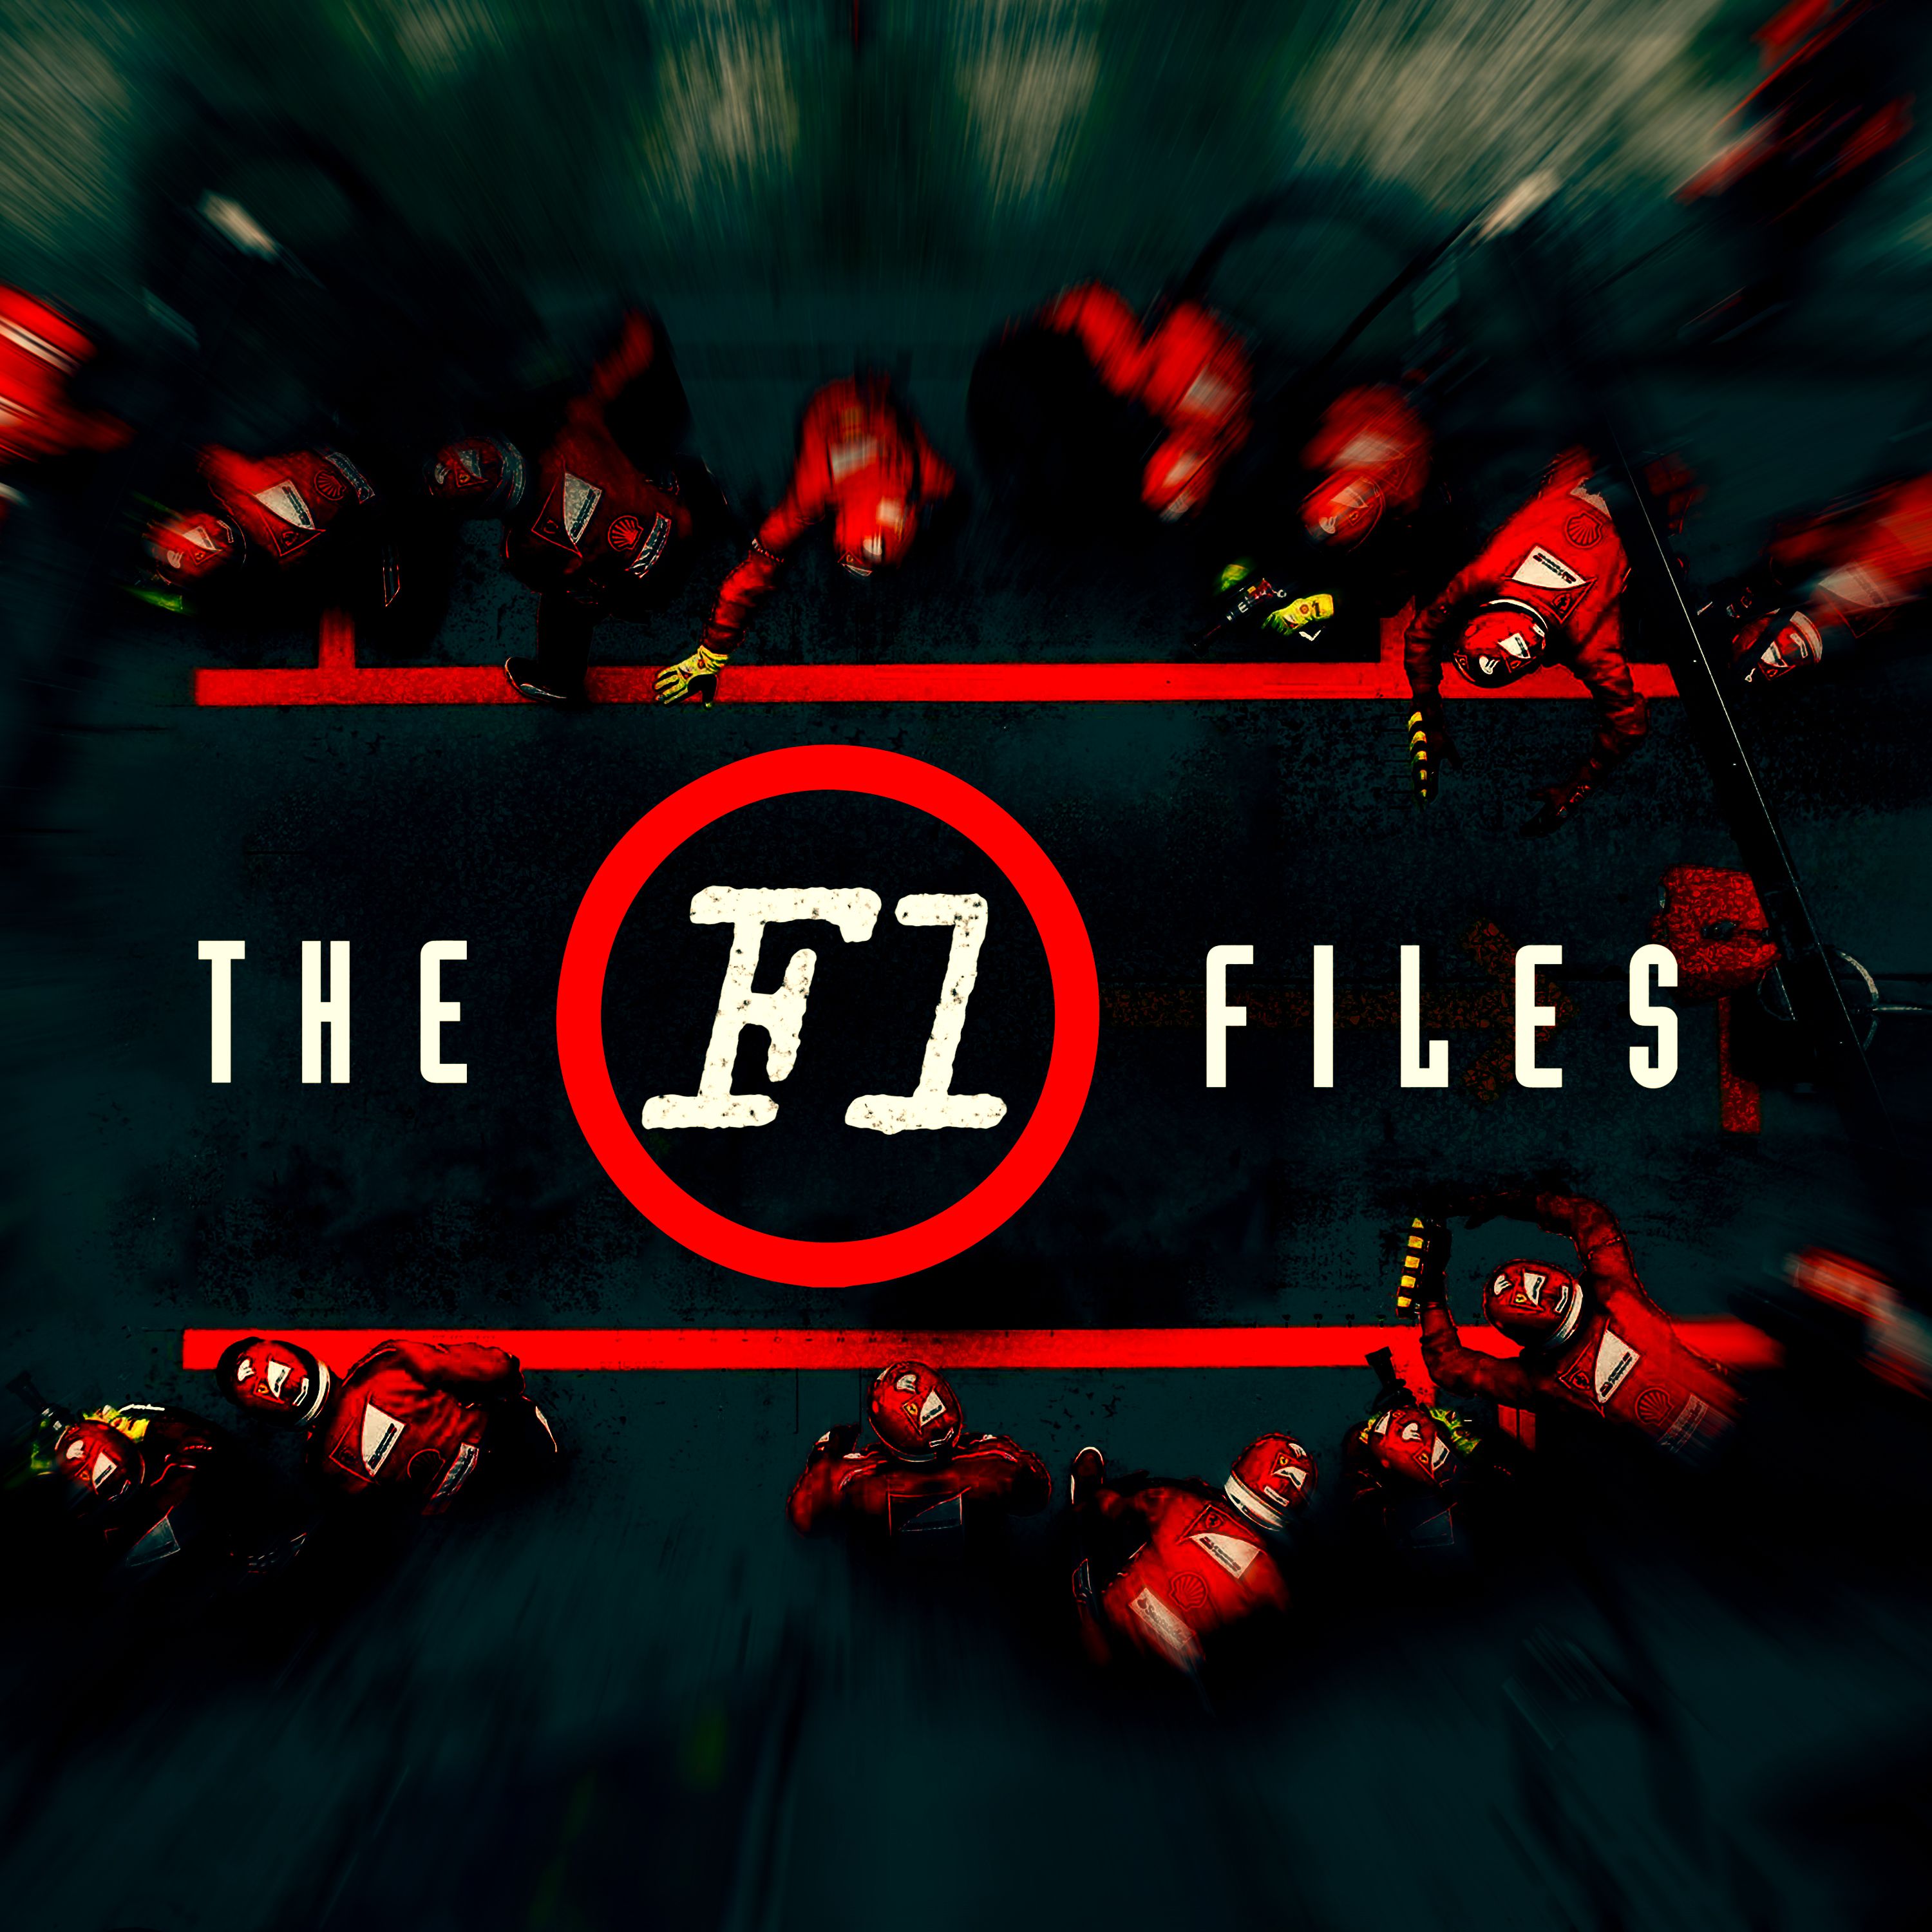 Stream The F1 Files Listen to podcast episodes online for free on SoundCloud